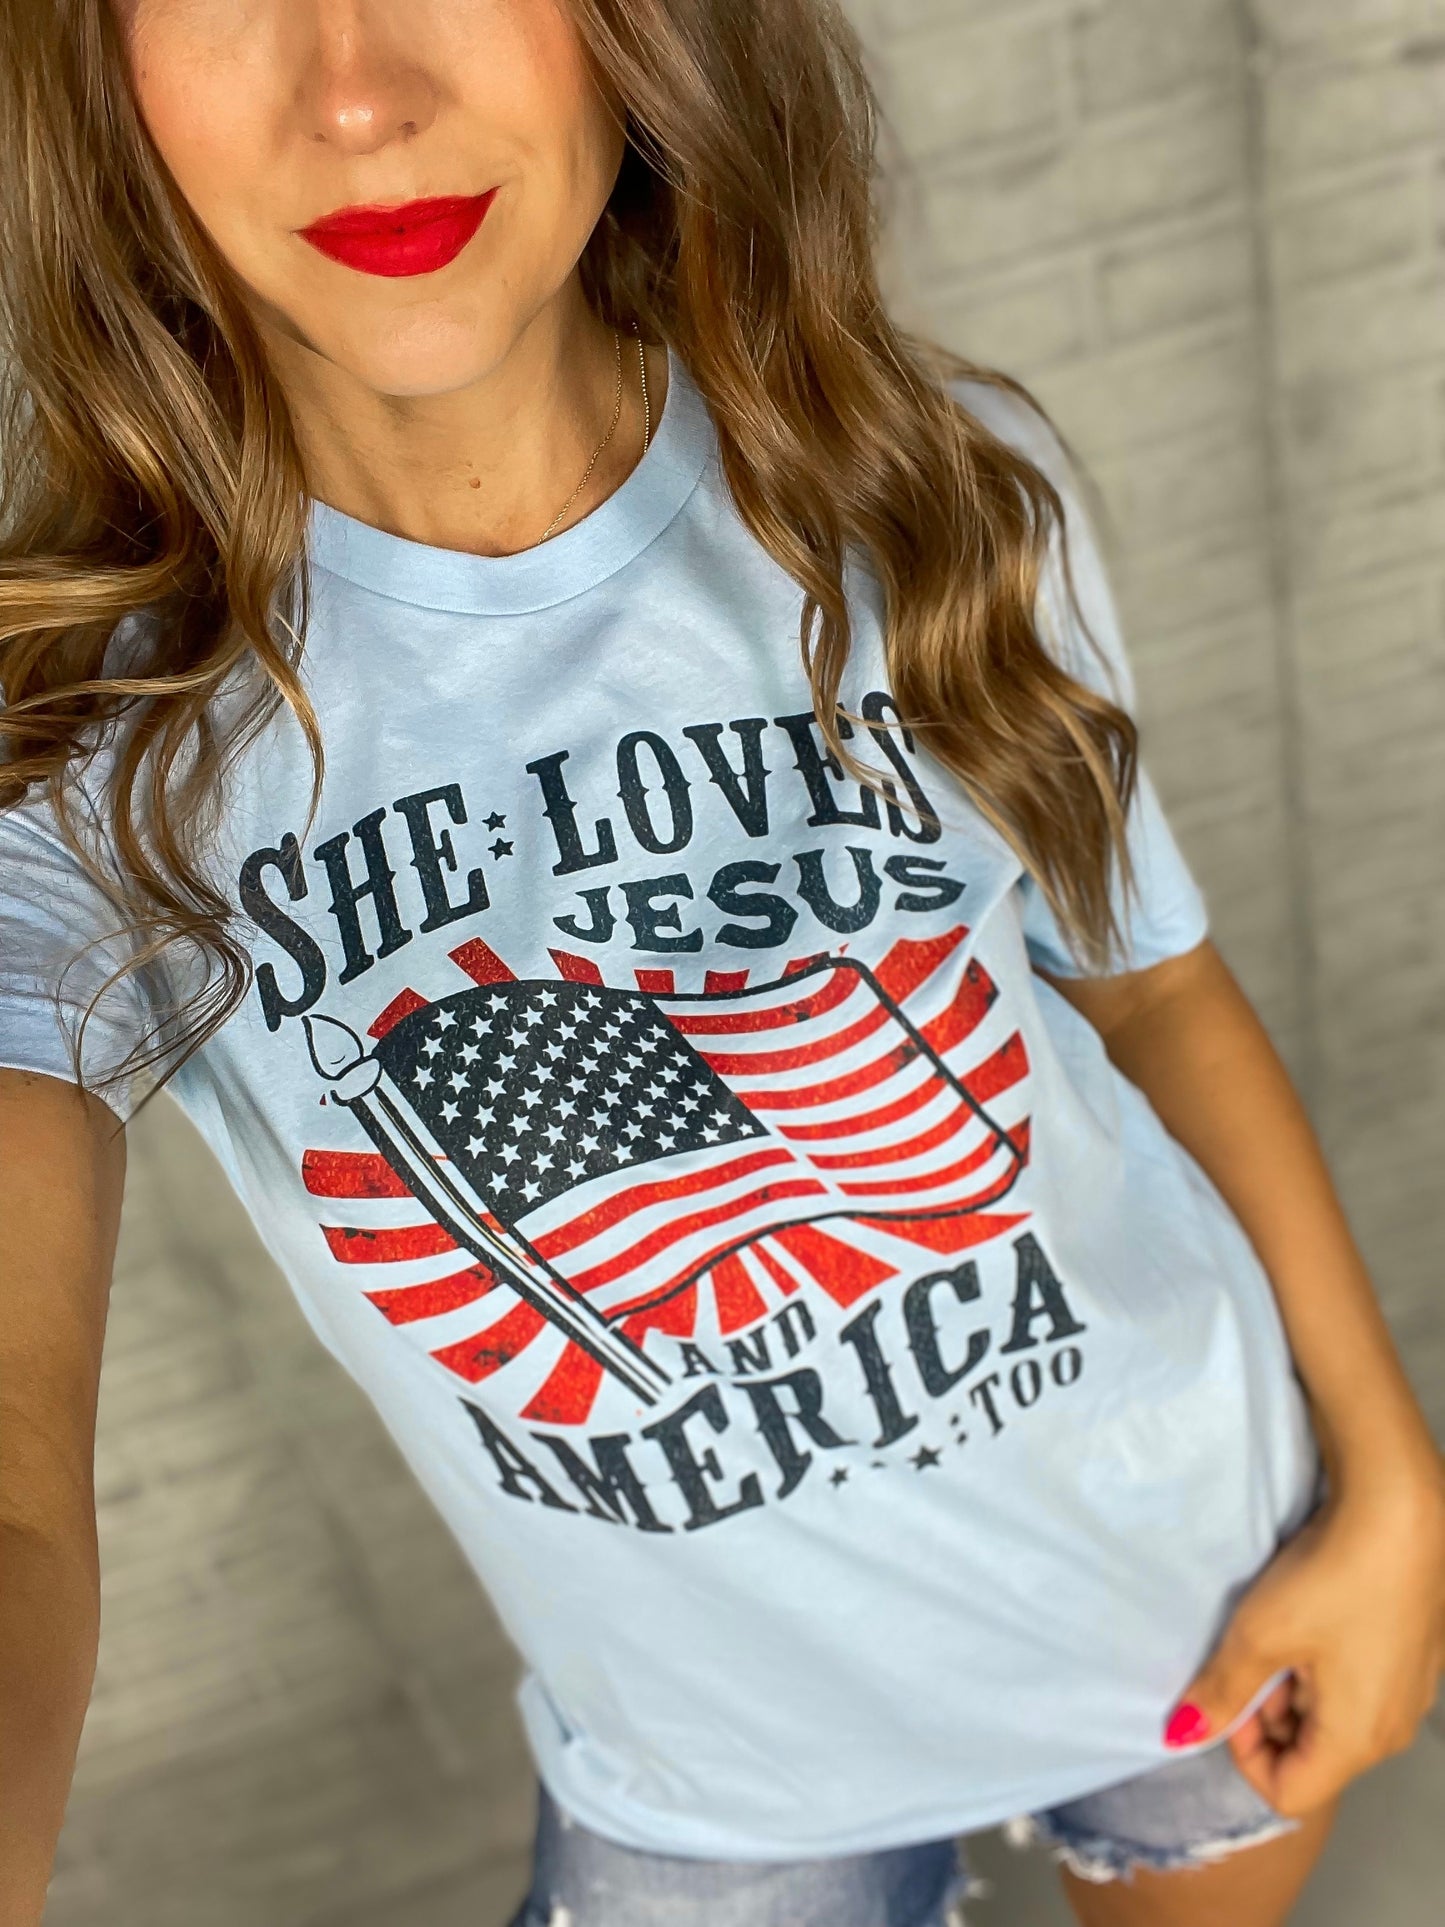 She Loves Jesus And America Too